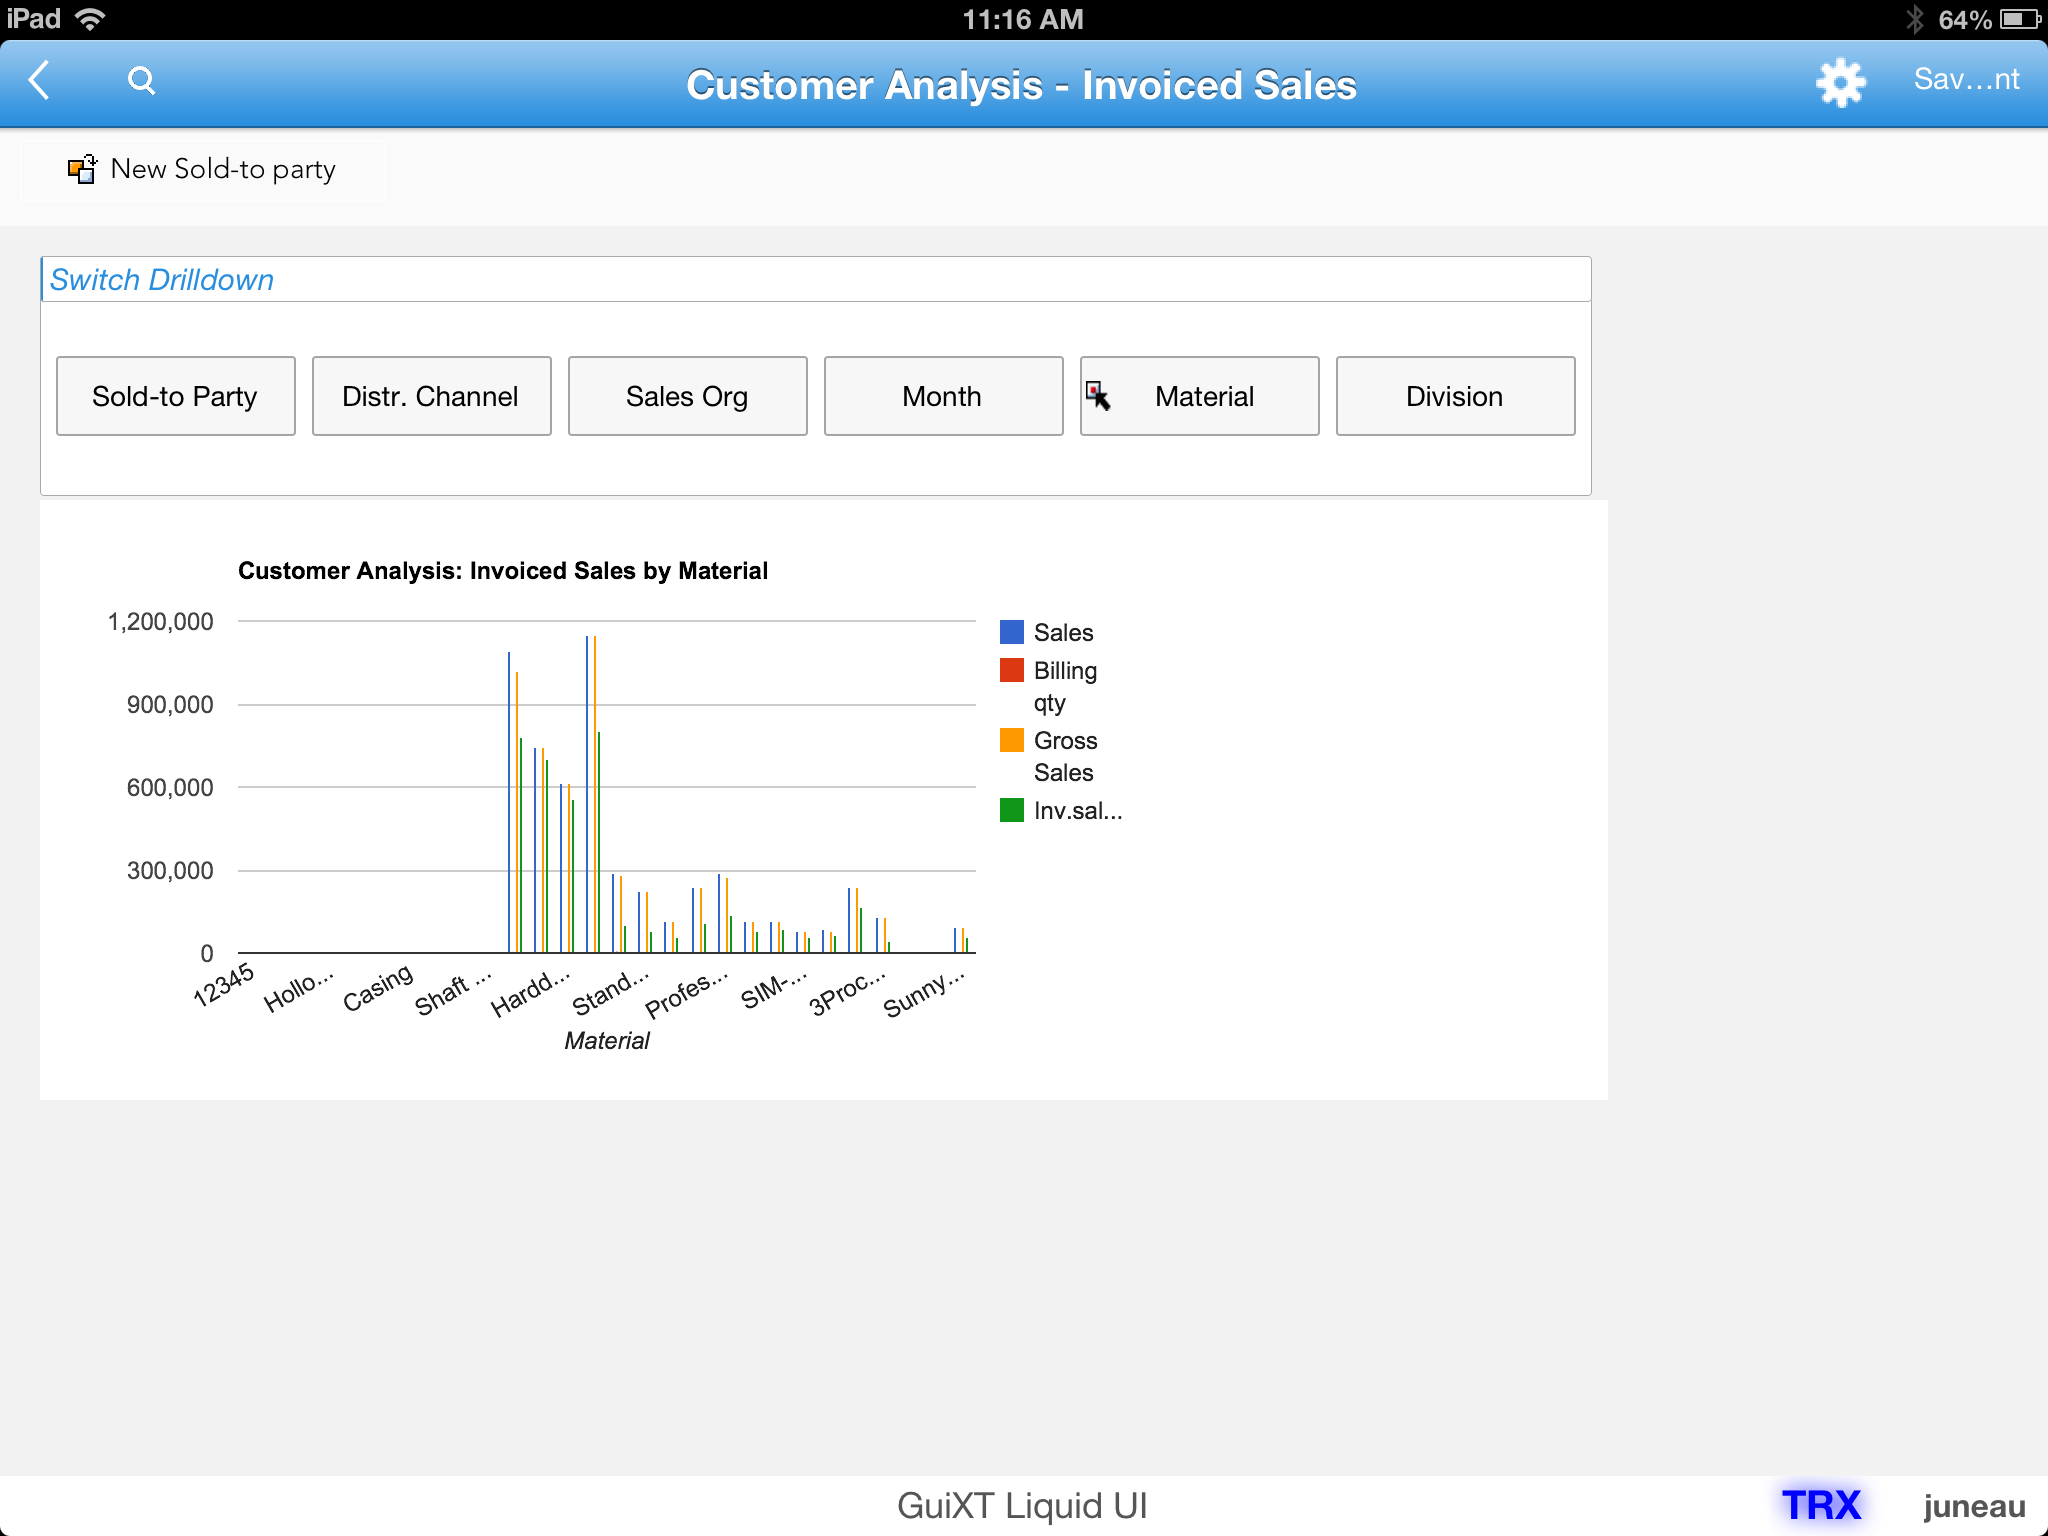 Customer Analysis of Invoiced Sales By Material